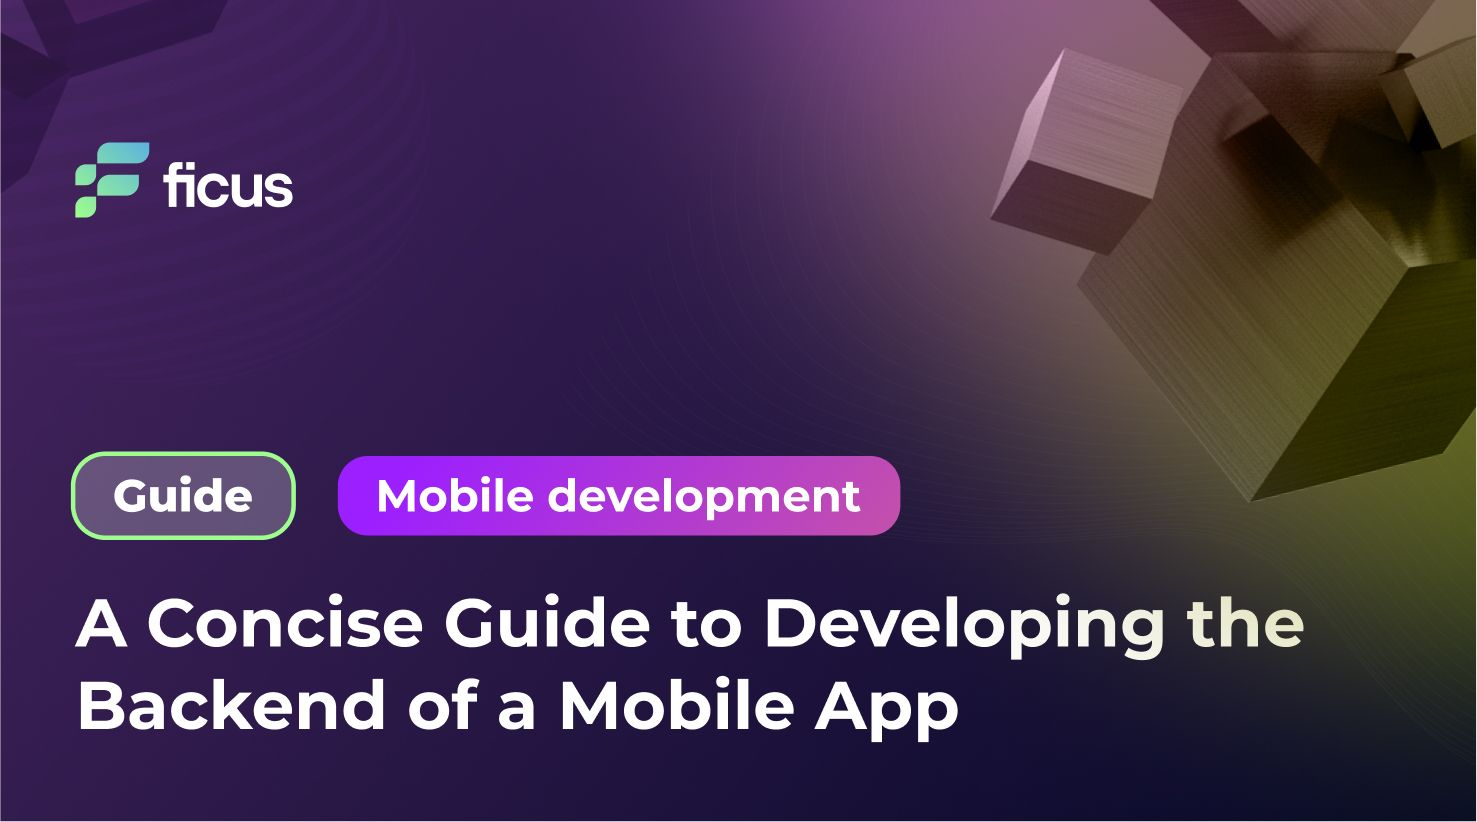 A Concise Guide to Developing the Backend of a Mobile App